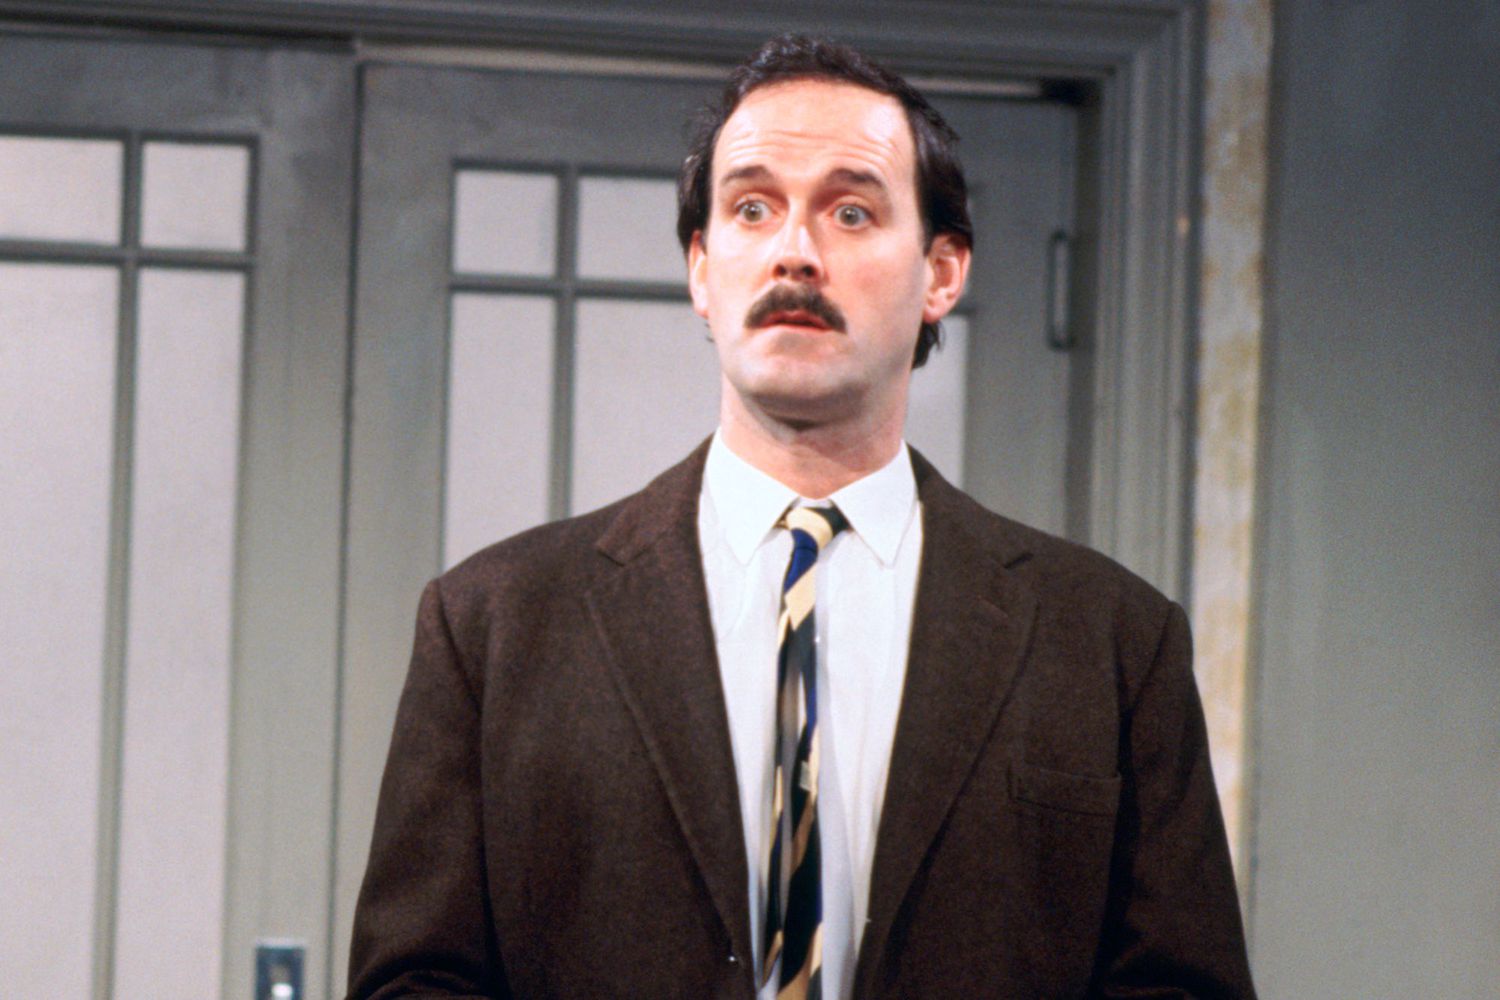 John Cleese on 'Fawlty Towers'